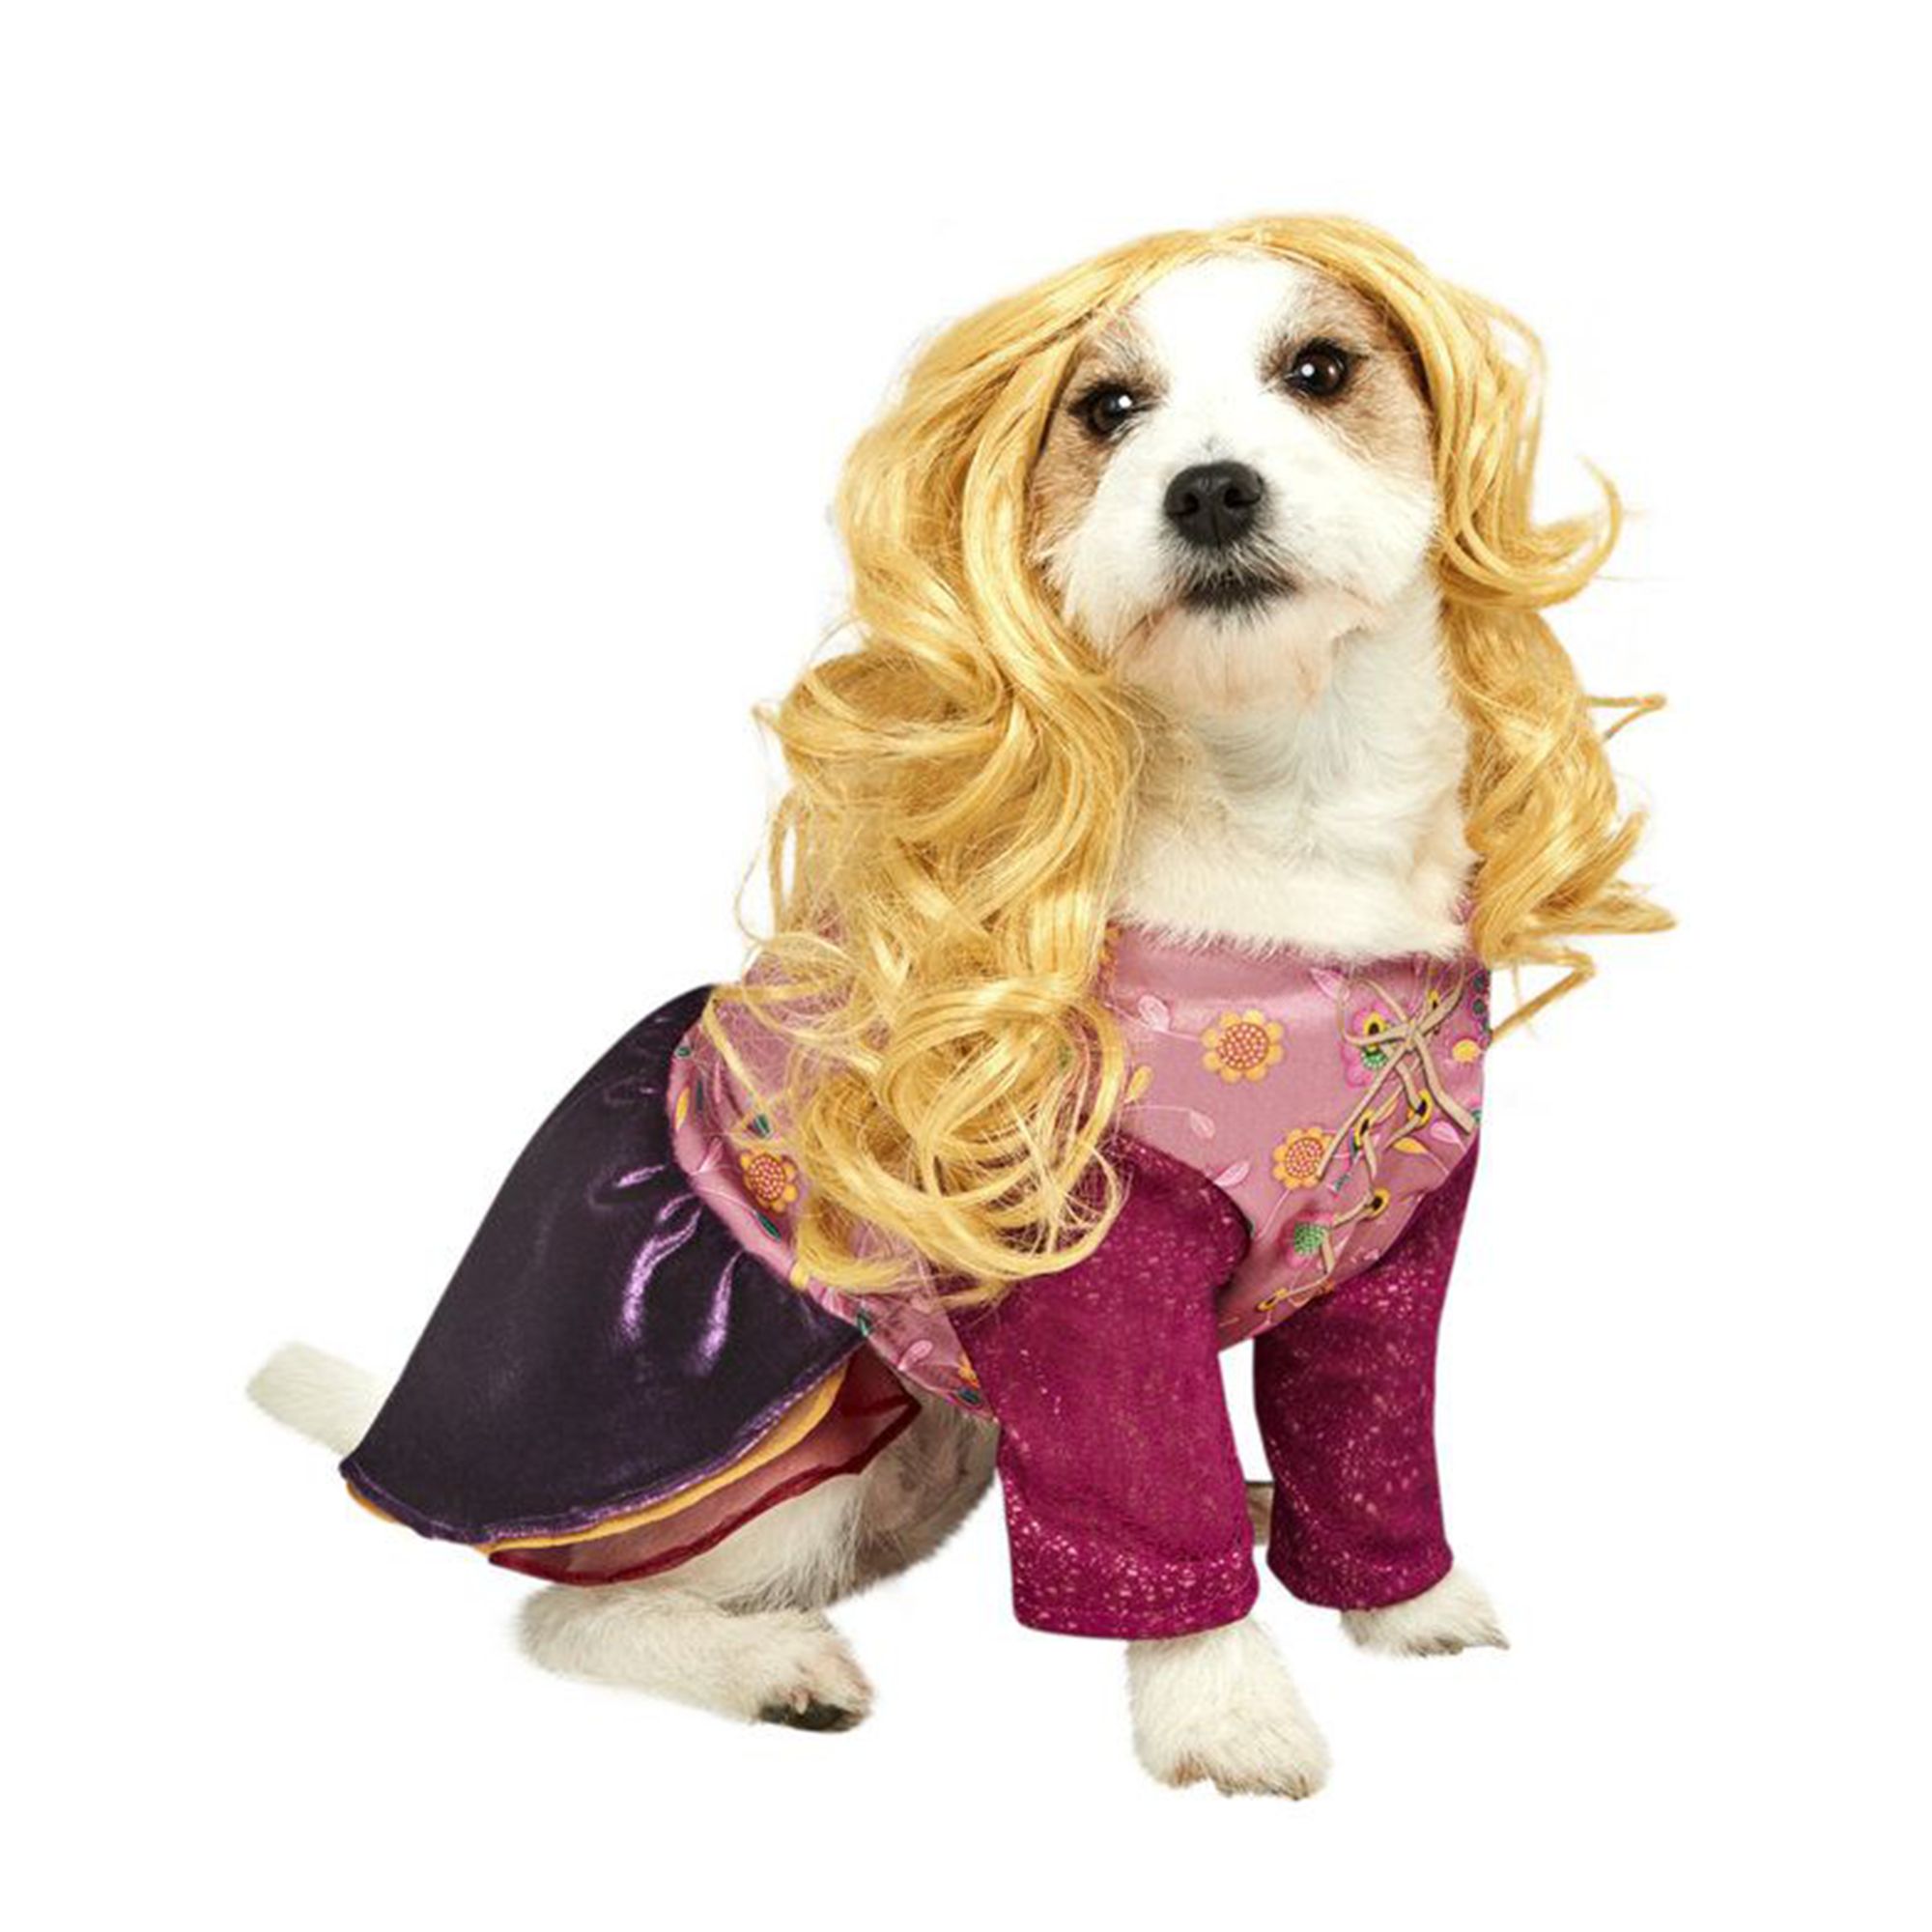 PetSmart Has New Hocus Pocus Toys and Halloween Costumes for Pets